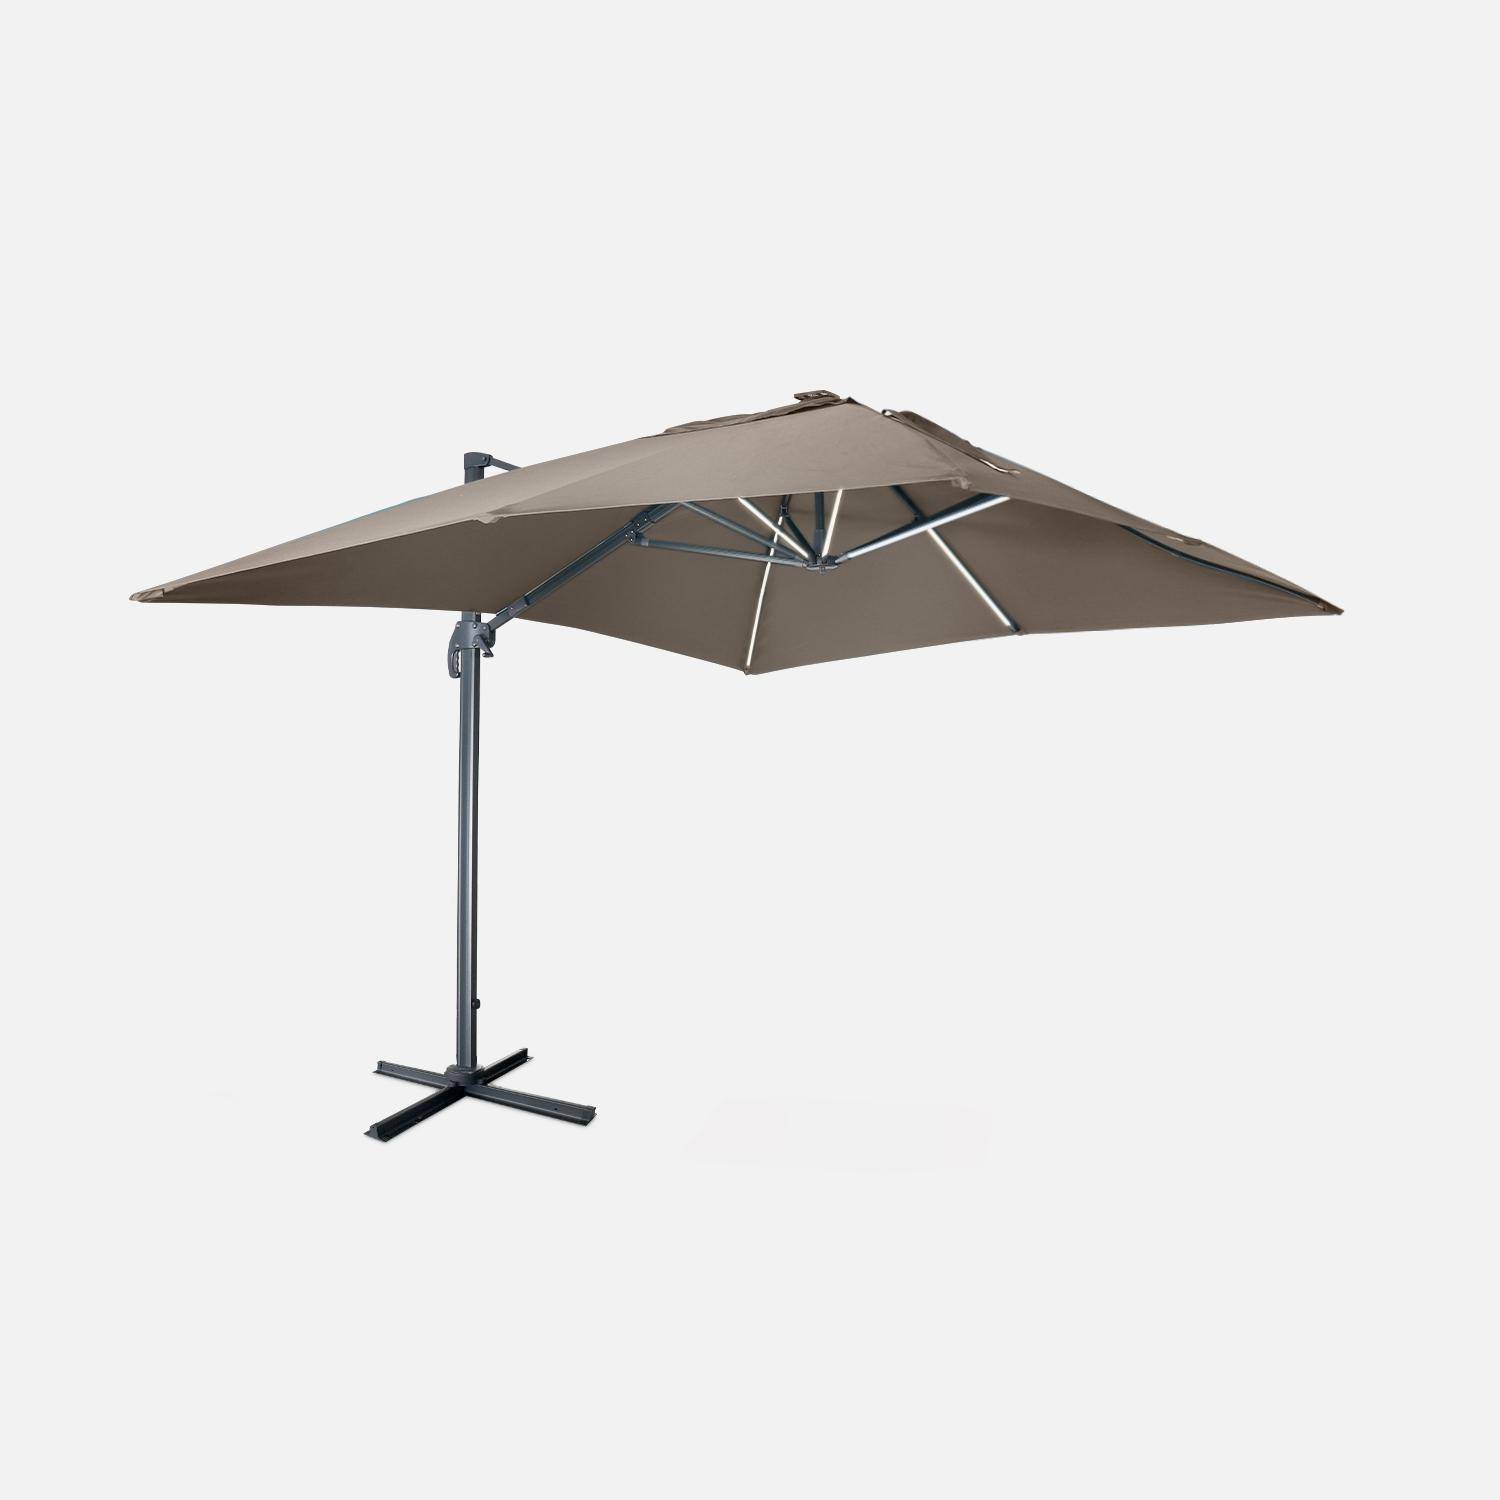 Premium rectangular 3x4m cantilever parasol with solar-powered integrated LED lights - Cantilever parasol, tiltable, foldable with 360° rotation, solar charging, cover included - Luce - Beige-brown Photo1